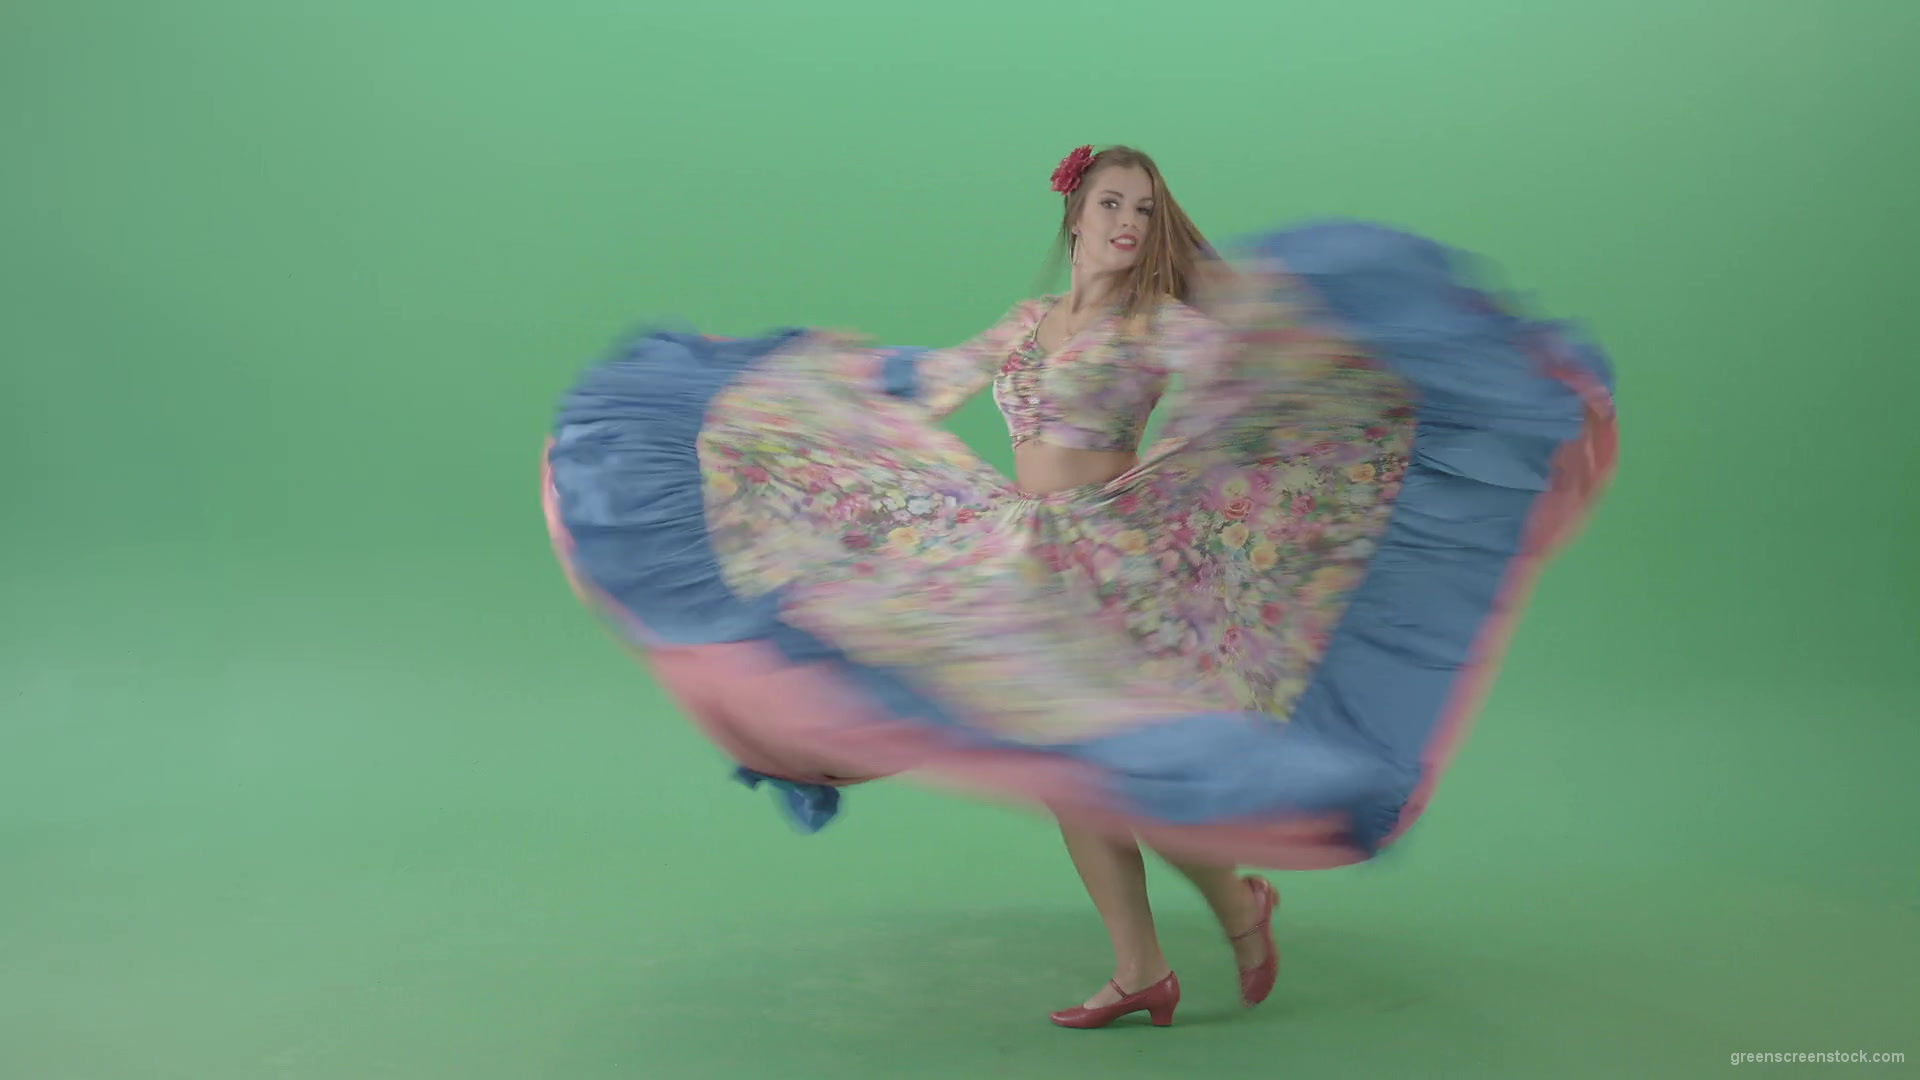 Balkan-Gipsy-Girl-spinning-and-dance-isolated-on-Green-Screen-4K-Video-Footage-1920_004 Green Screen Stock